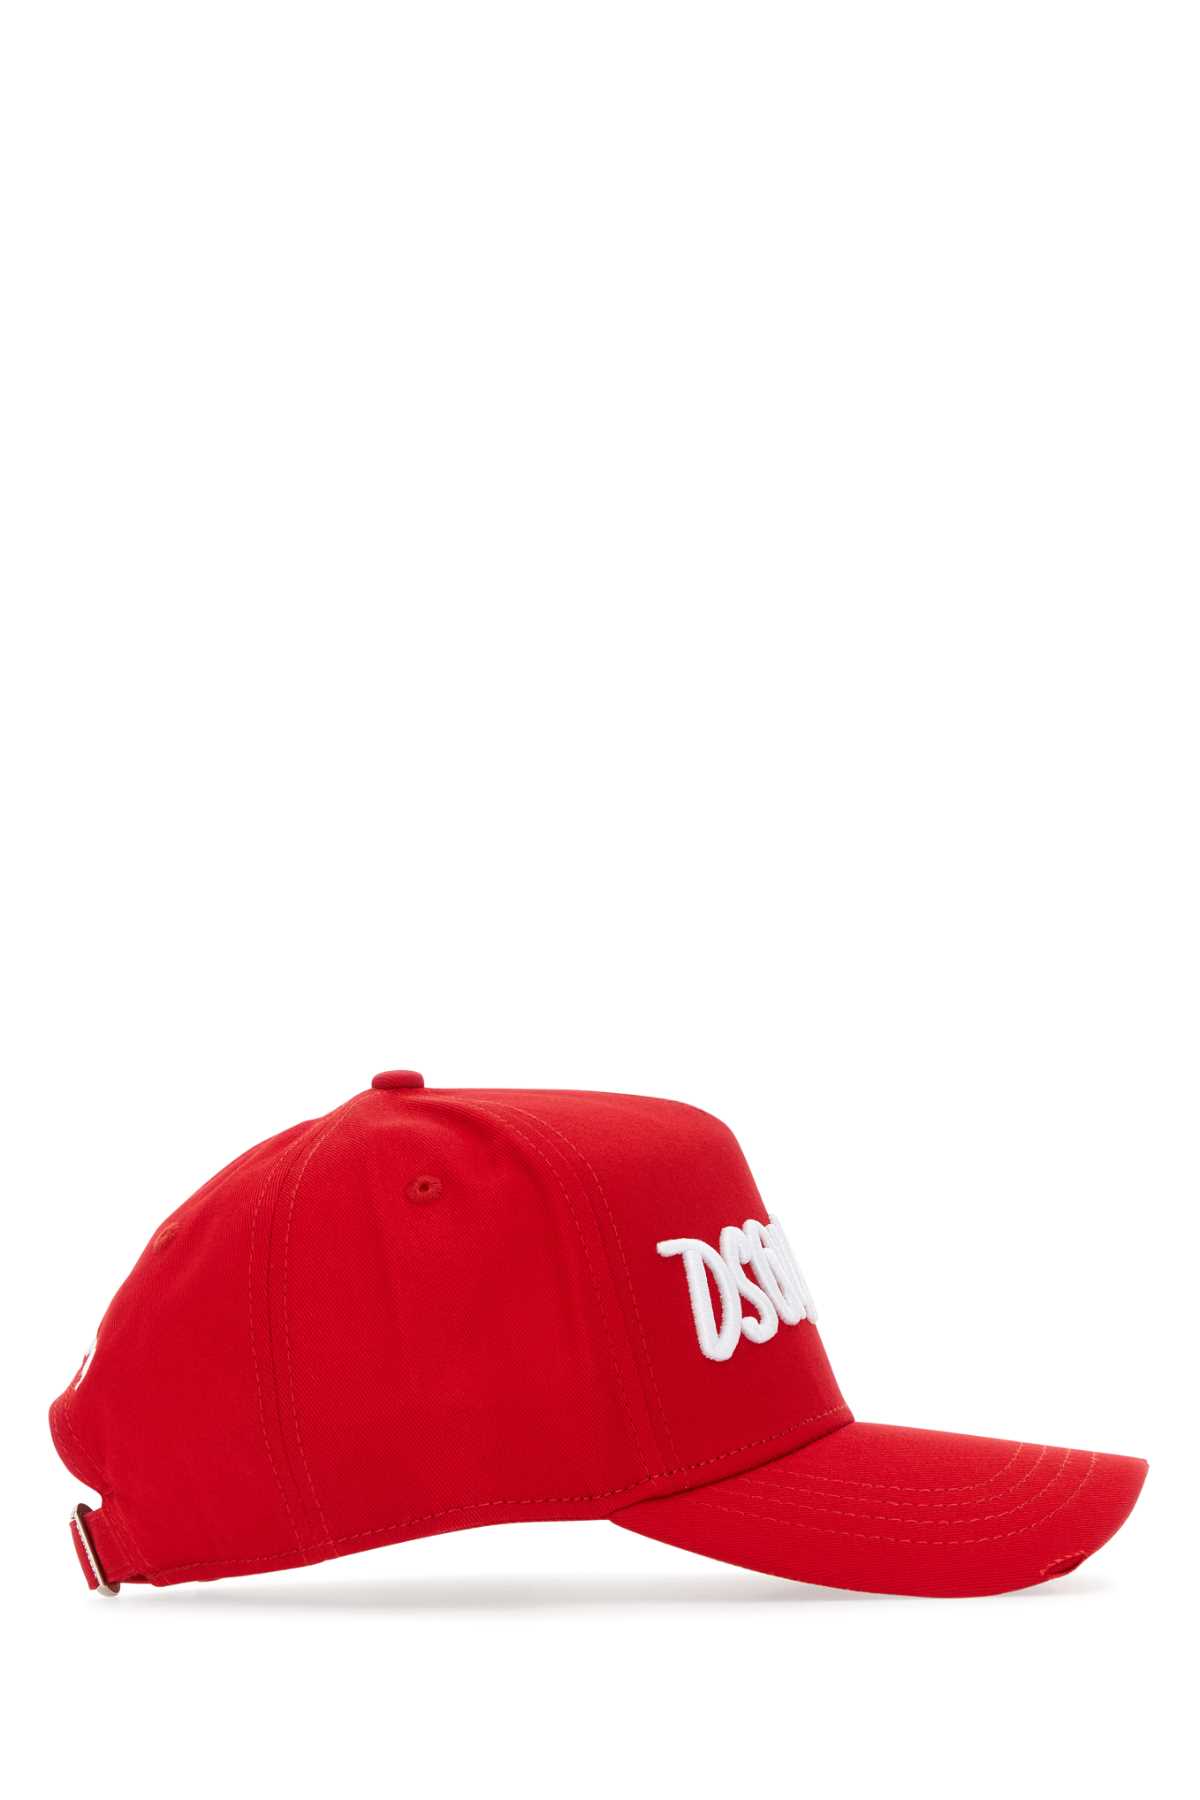 Shop Dsquared2 Red Cotton Baseball Cap In M818